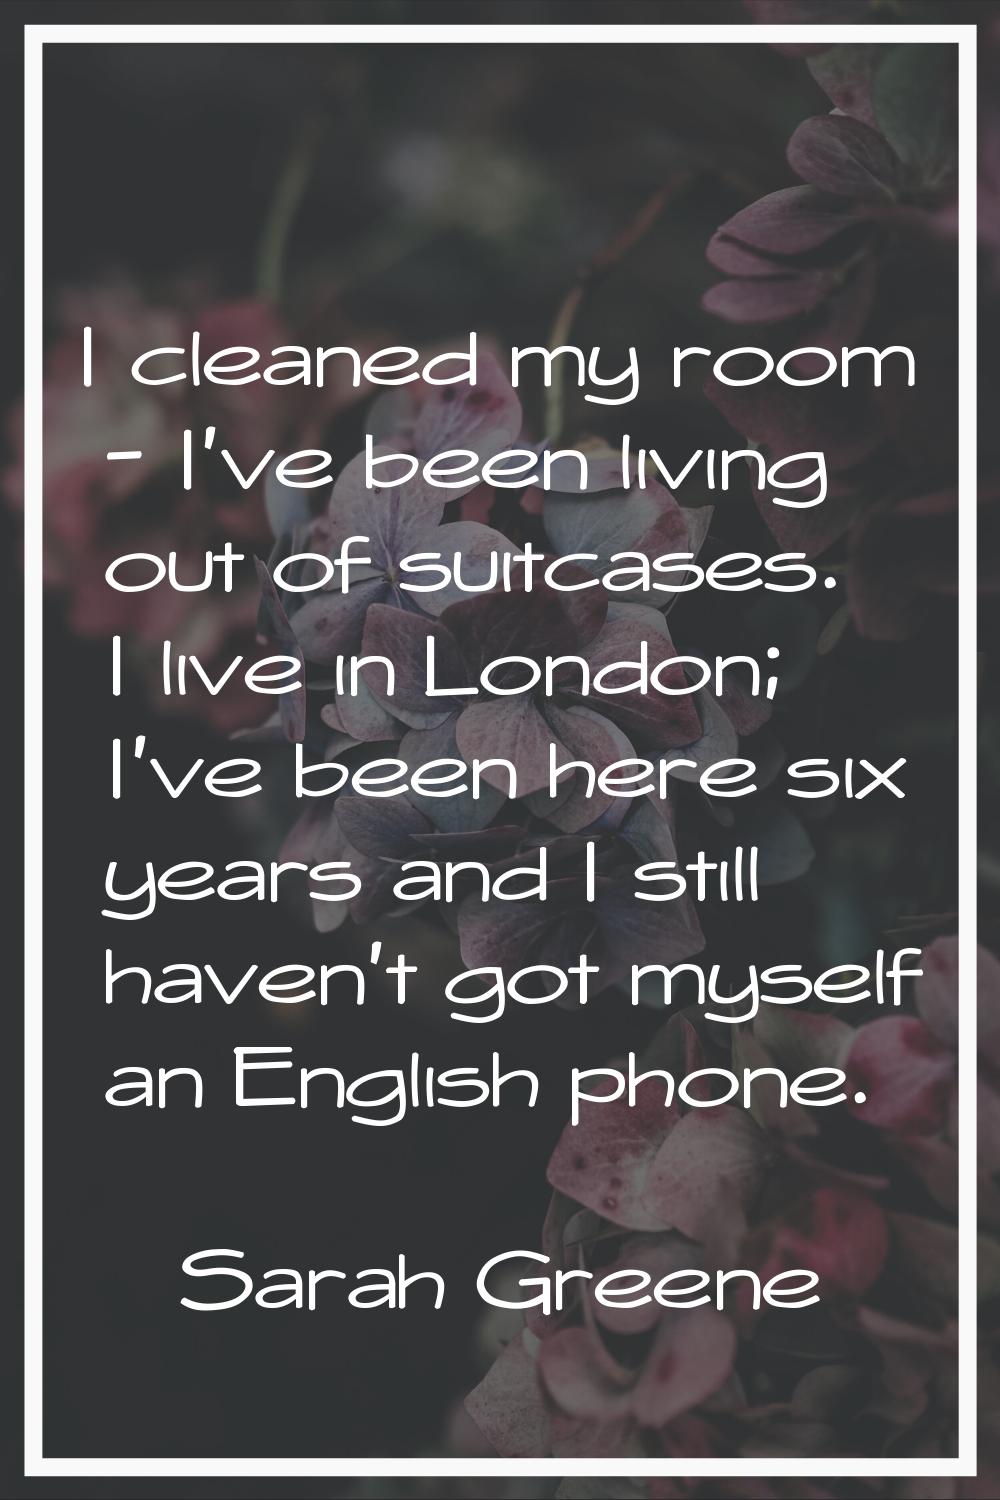 I cleaned my room - I've been living out of suitcases. I live in London; I've been here six years a